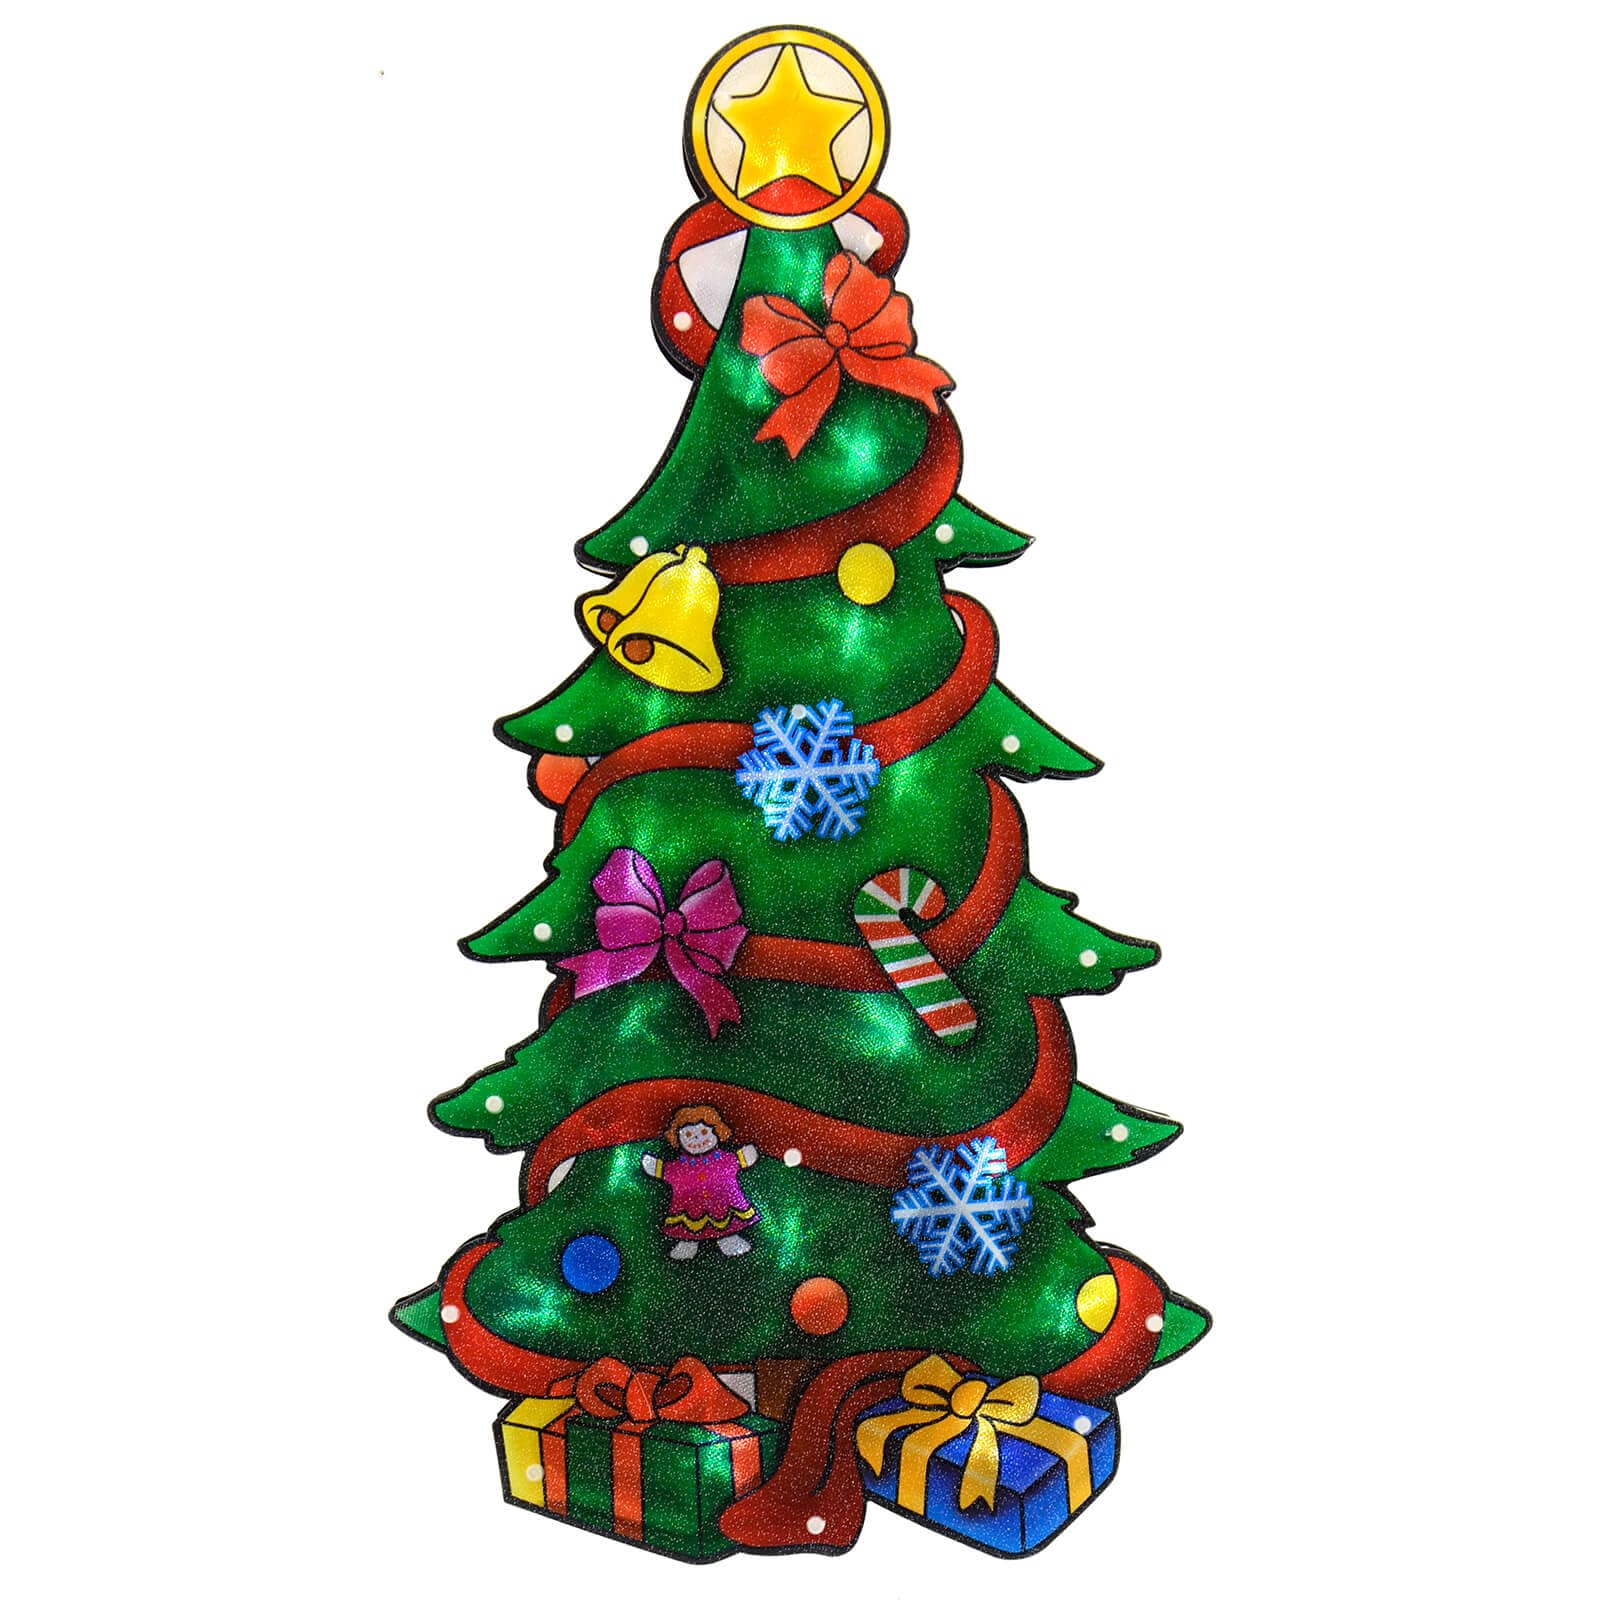 Christmas tree light up window silhouette decoration with snowflakes, candy cane, bells, bow and presents